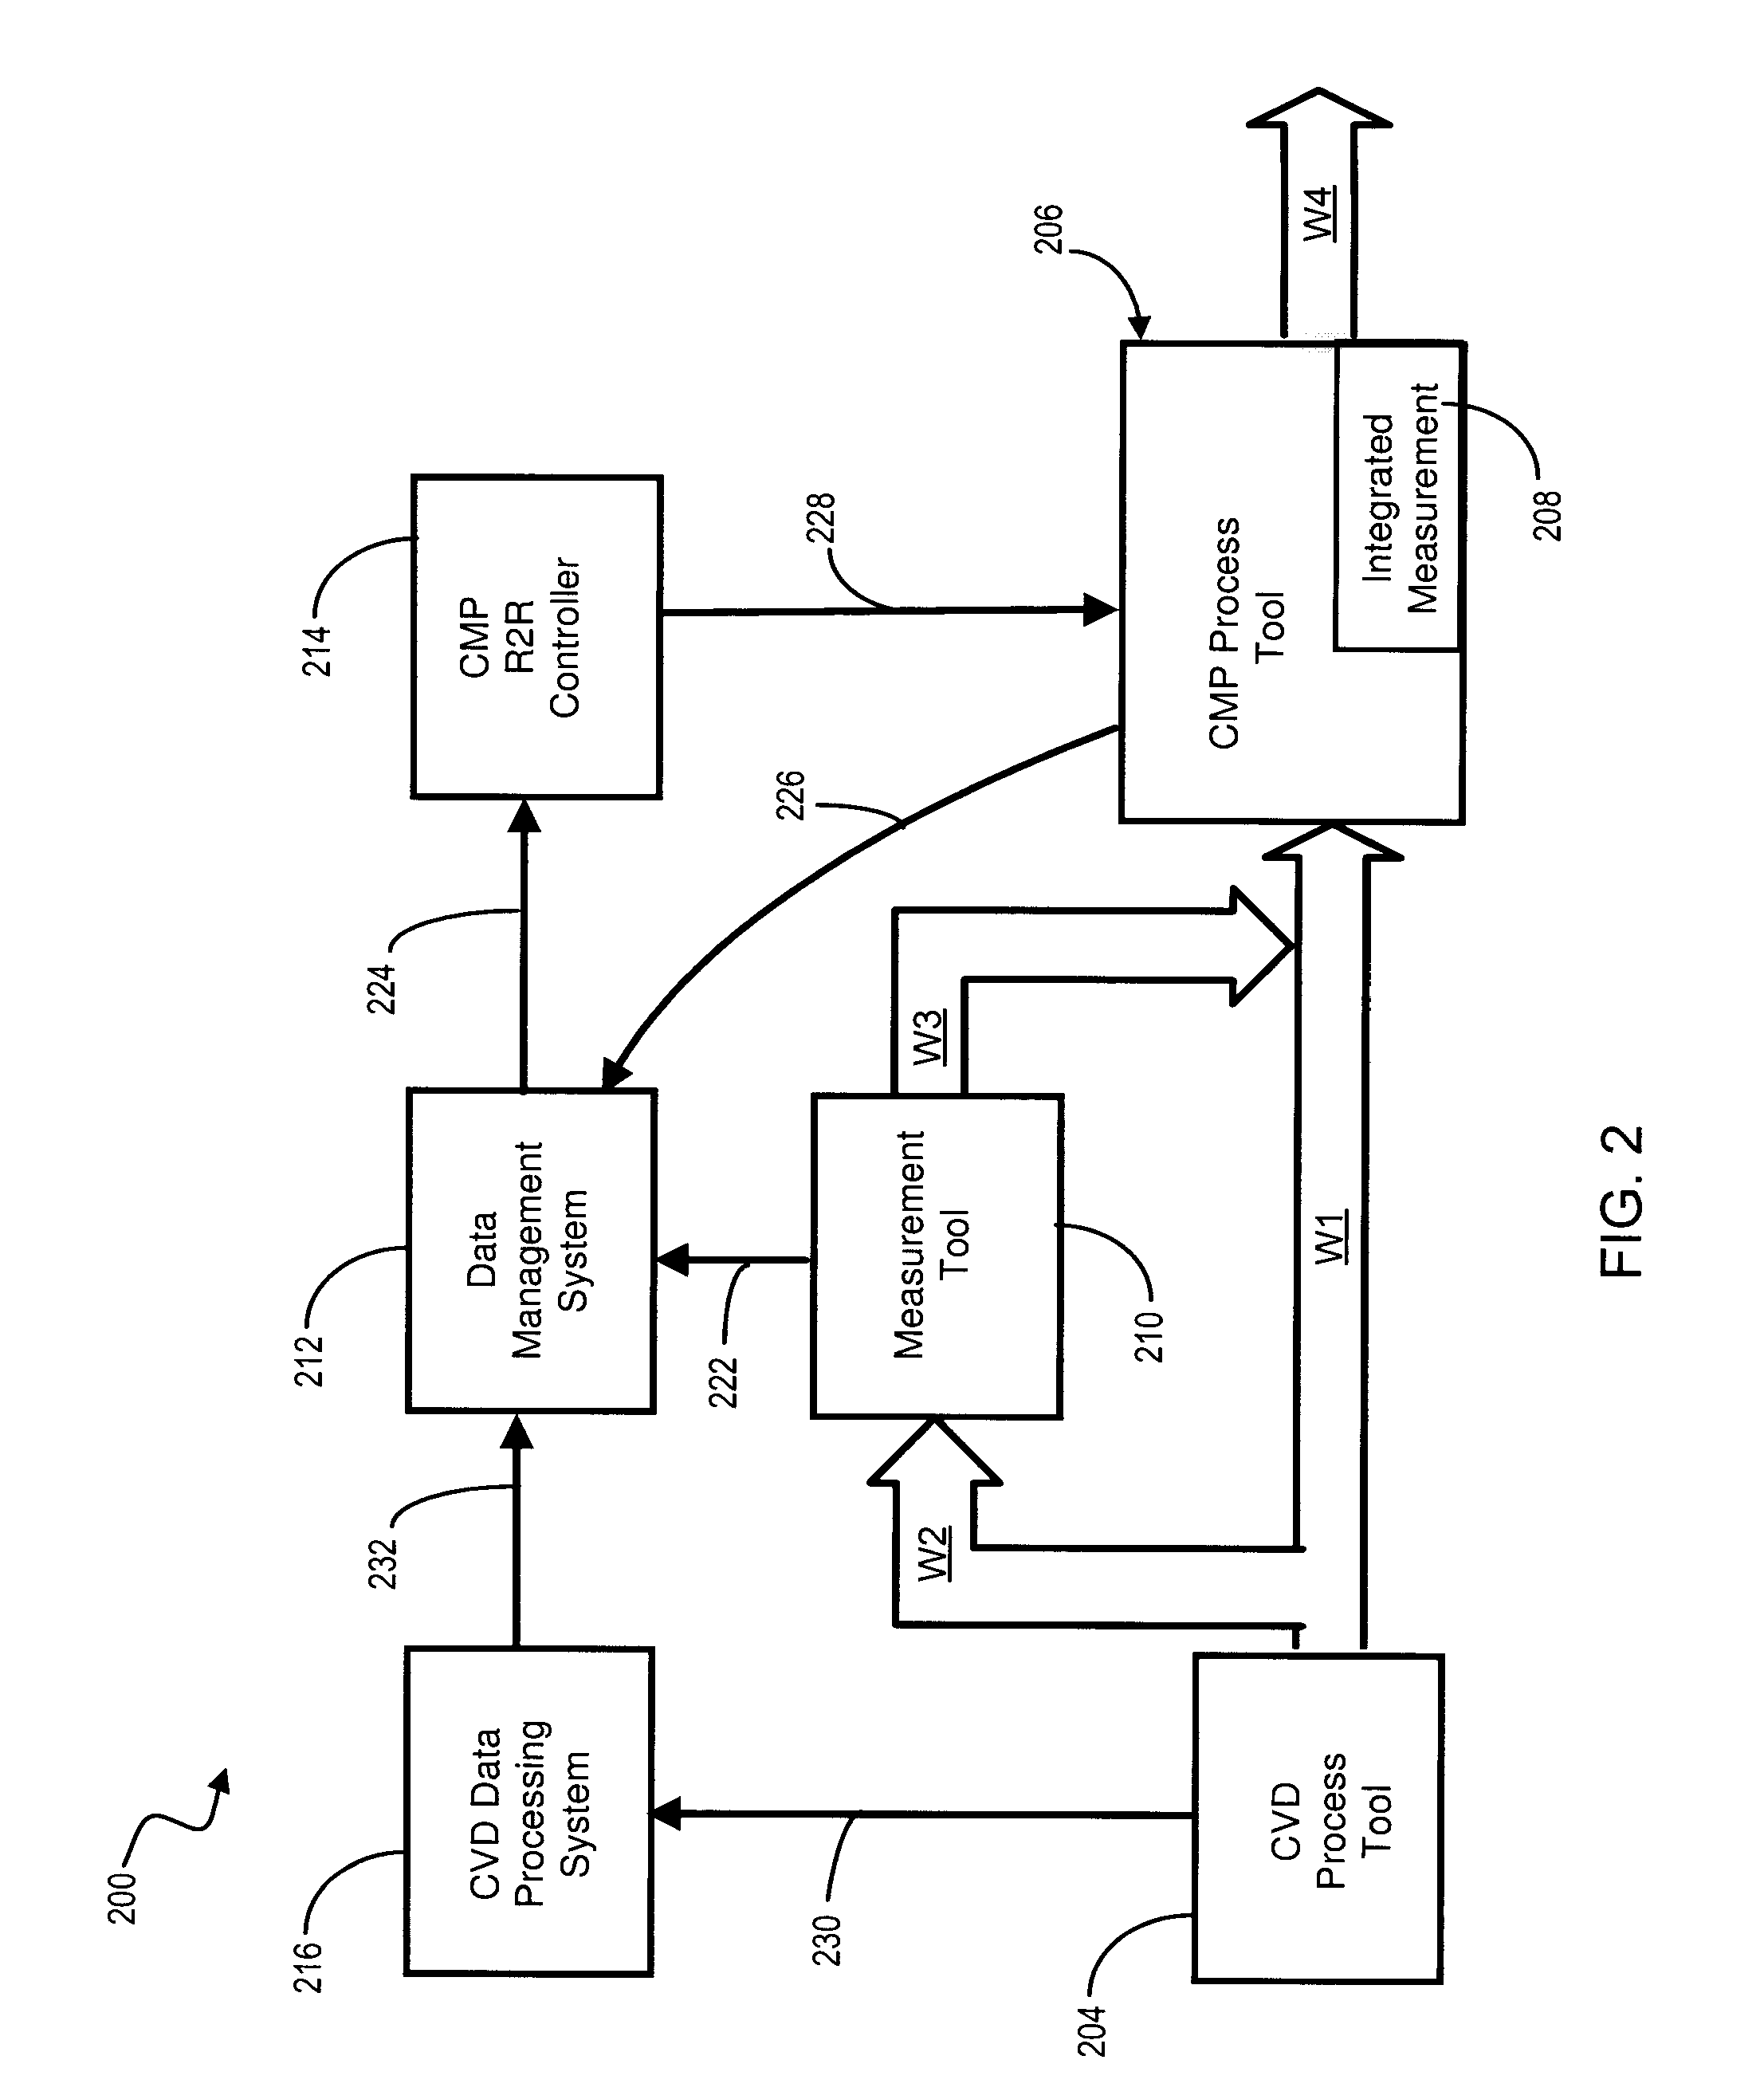 Method and system for reducing the variation in film thickness on a plurality of semiconductor wafers having multiple deposition paths in a semiconductor manufacturing process